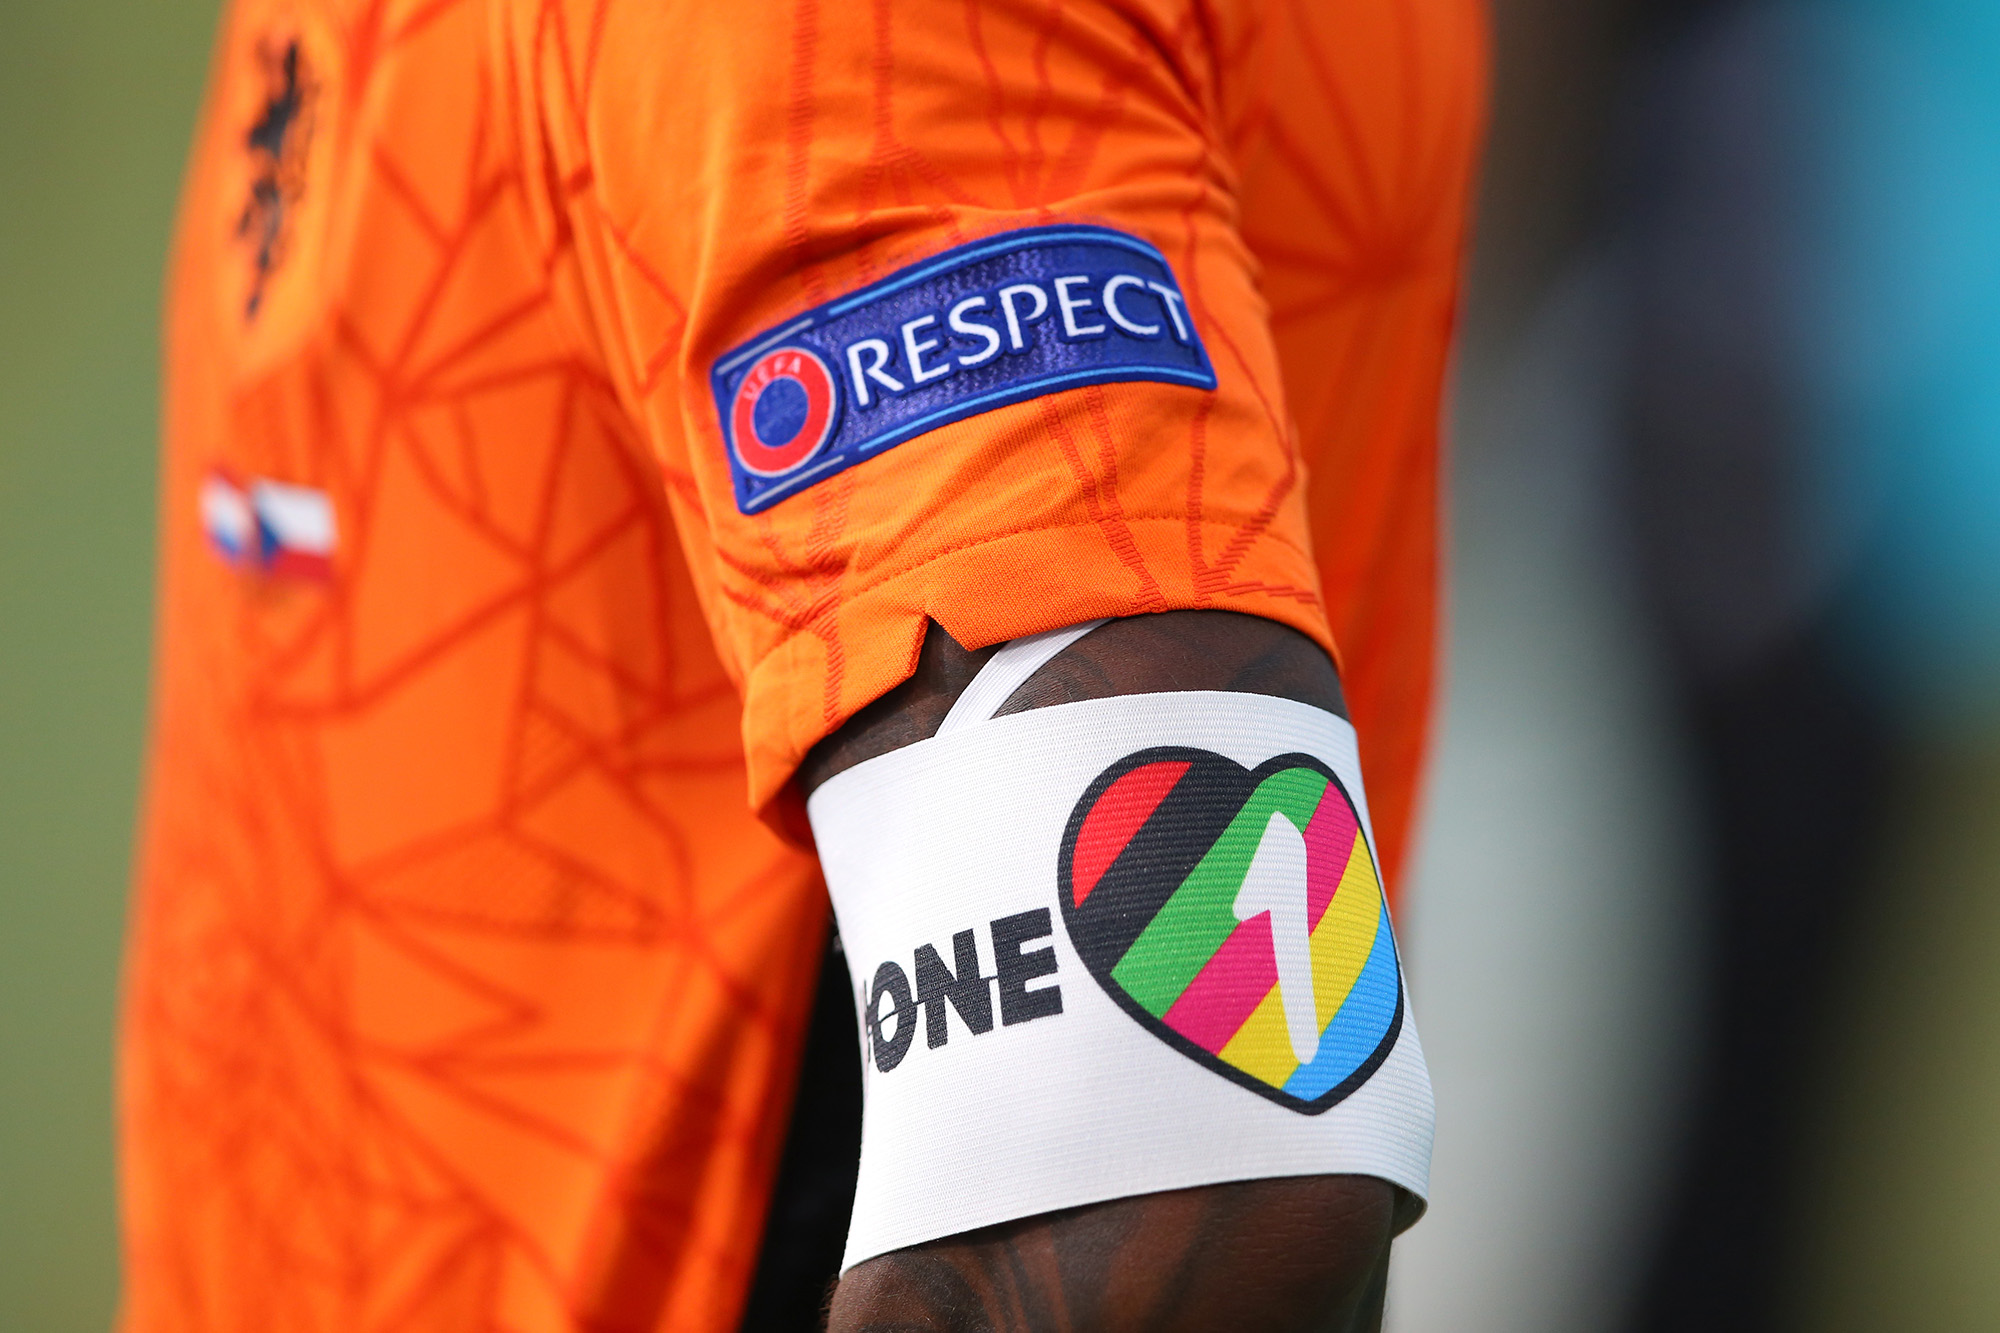 A detailed view of the 'ONE-LOVE' captains armband worn by Georginio Wijnaldum of Netherlands worn during a match between Netherlands and Czech Republic at Puskas Arena on June 27, 2021 in Budapest, Hungary.